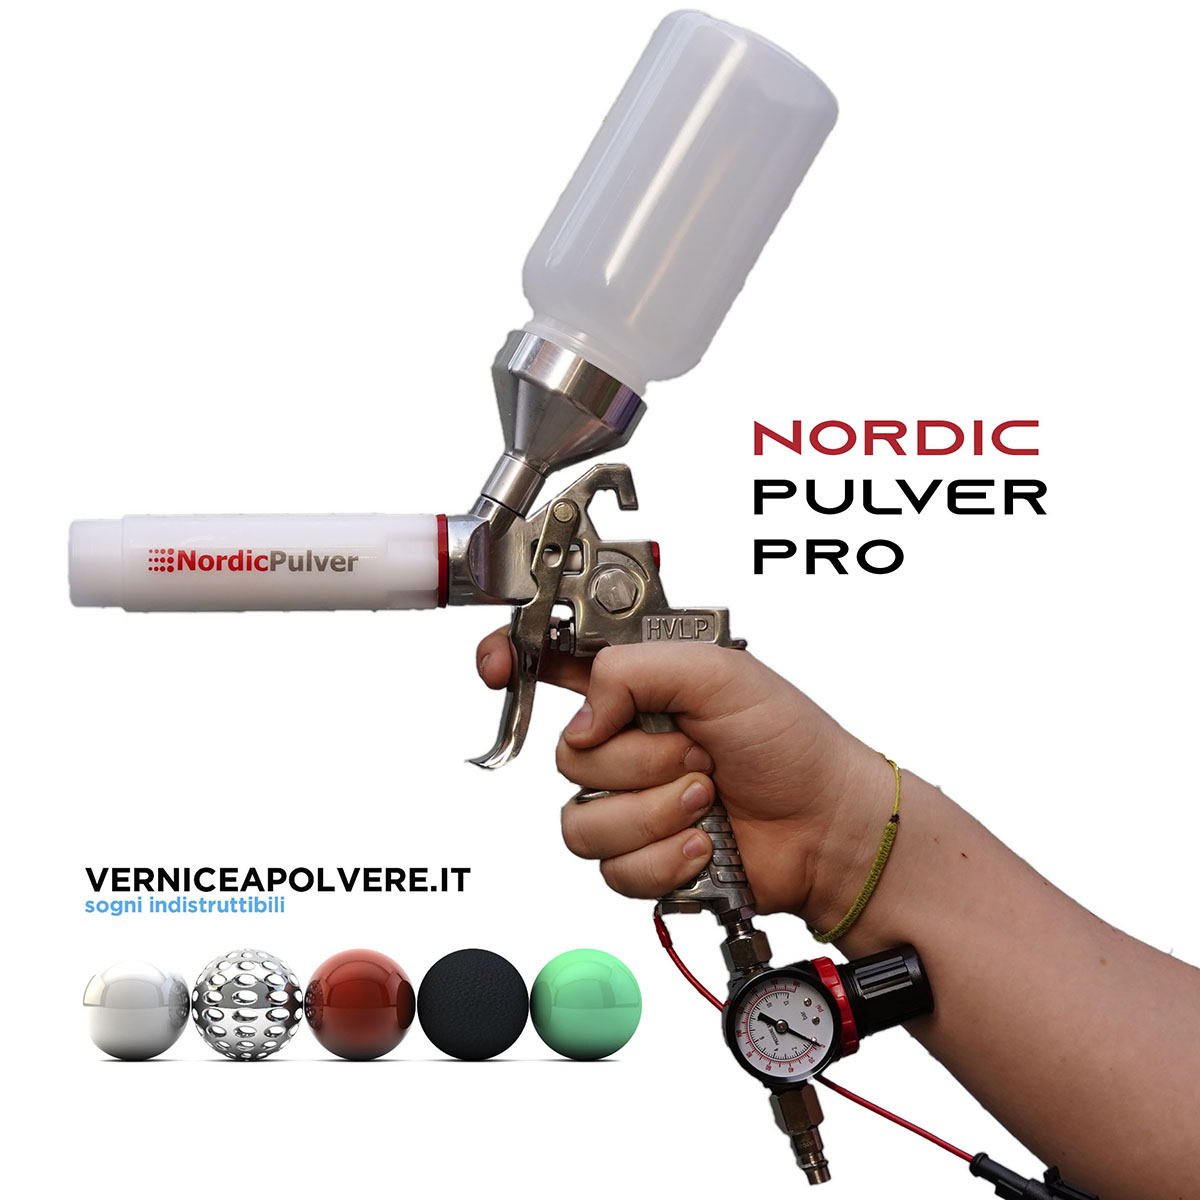 https://verniceapolvere.it/images/stories/virtuemart/product/Nordic%20Pulver%20Pro%20pistola%20vernice%20a%20polvere%20011.jpg